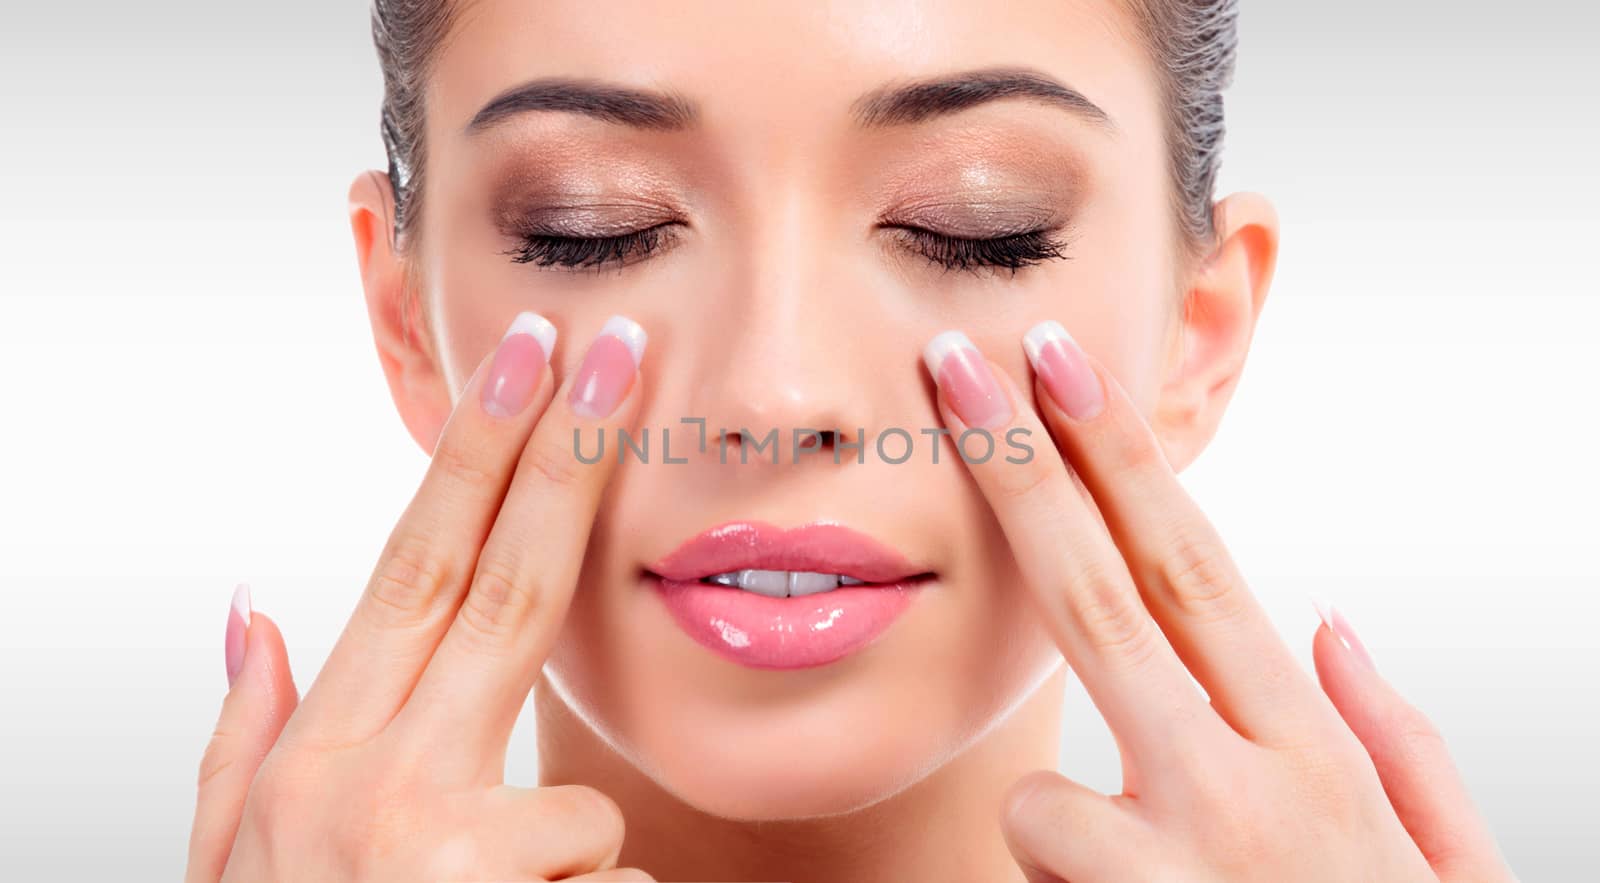 Pretty woman massaging her face against a grey background with copyspace